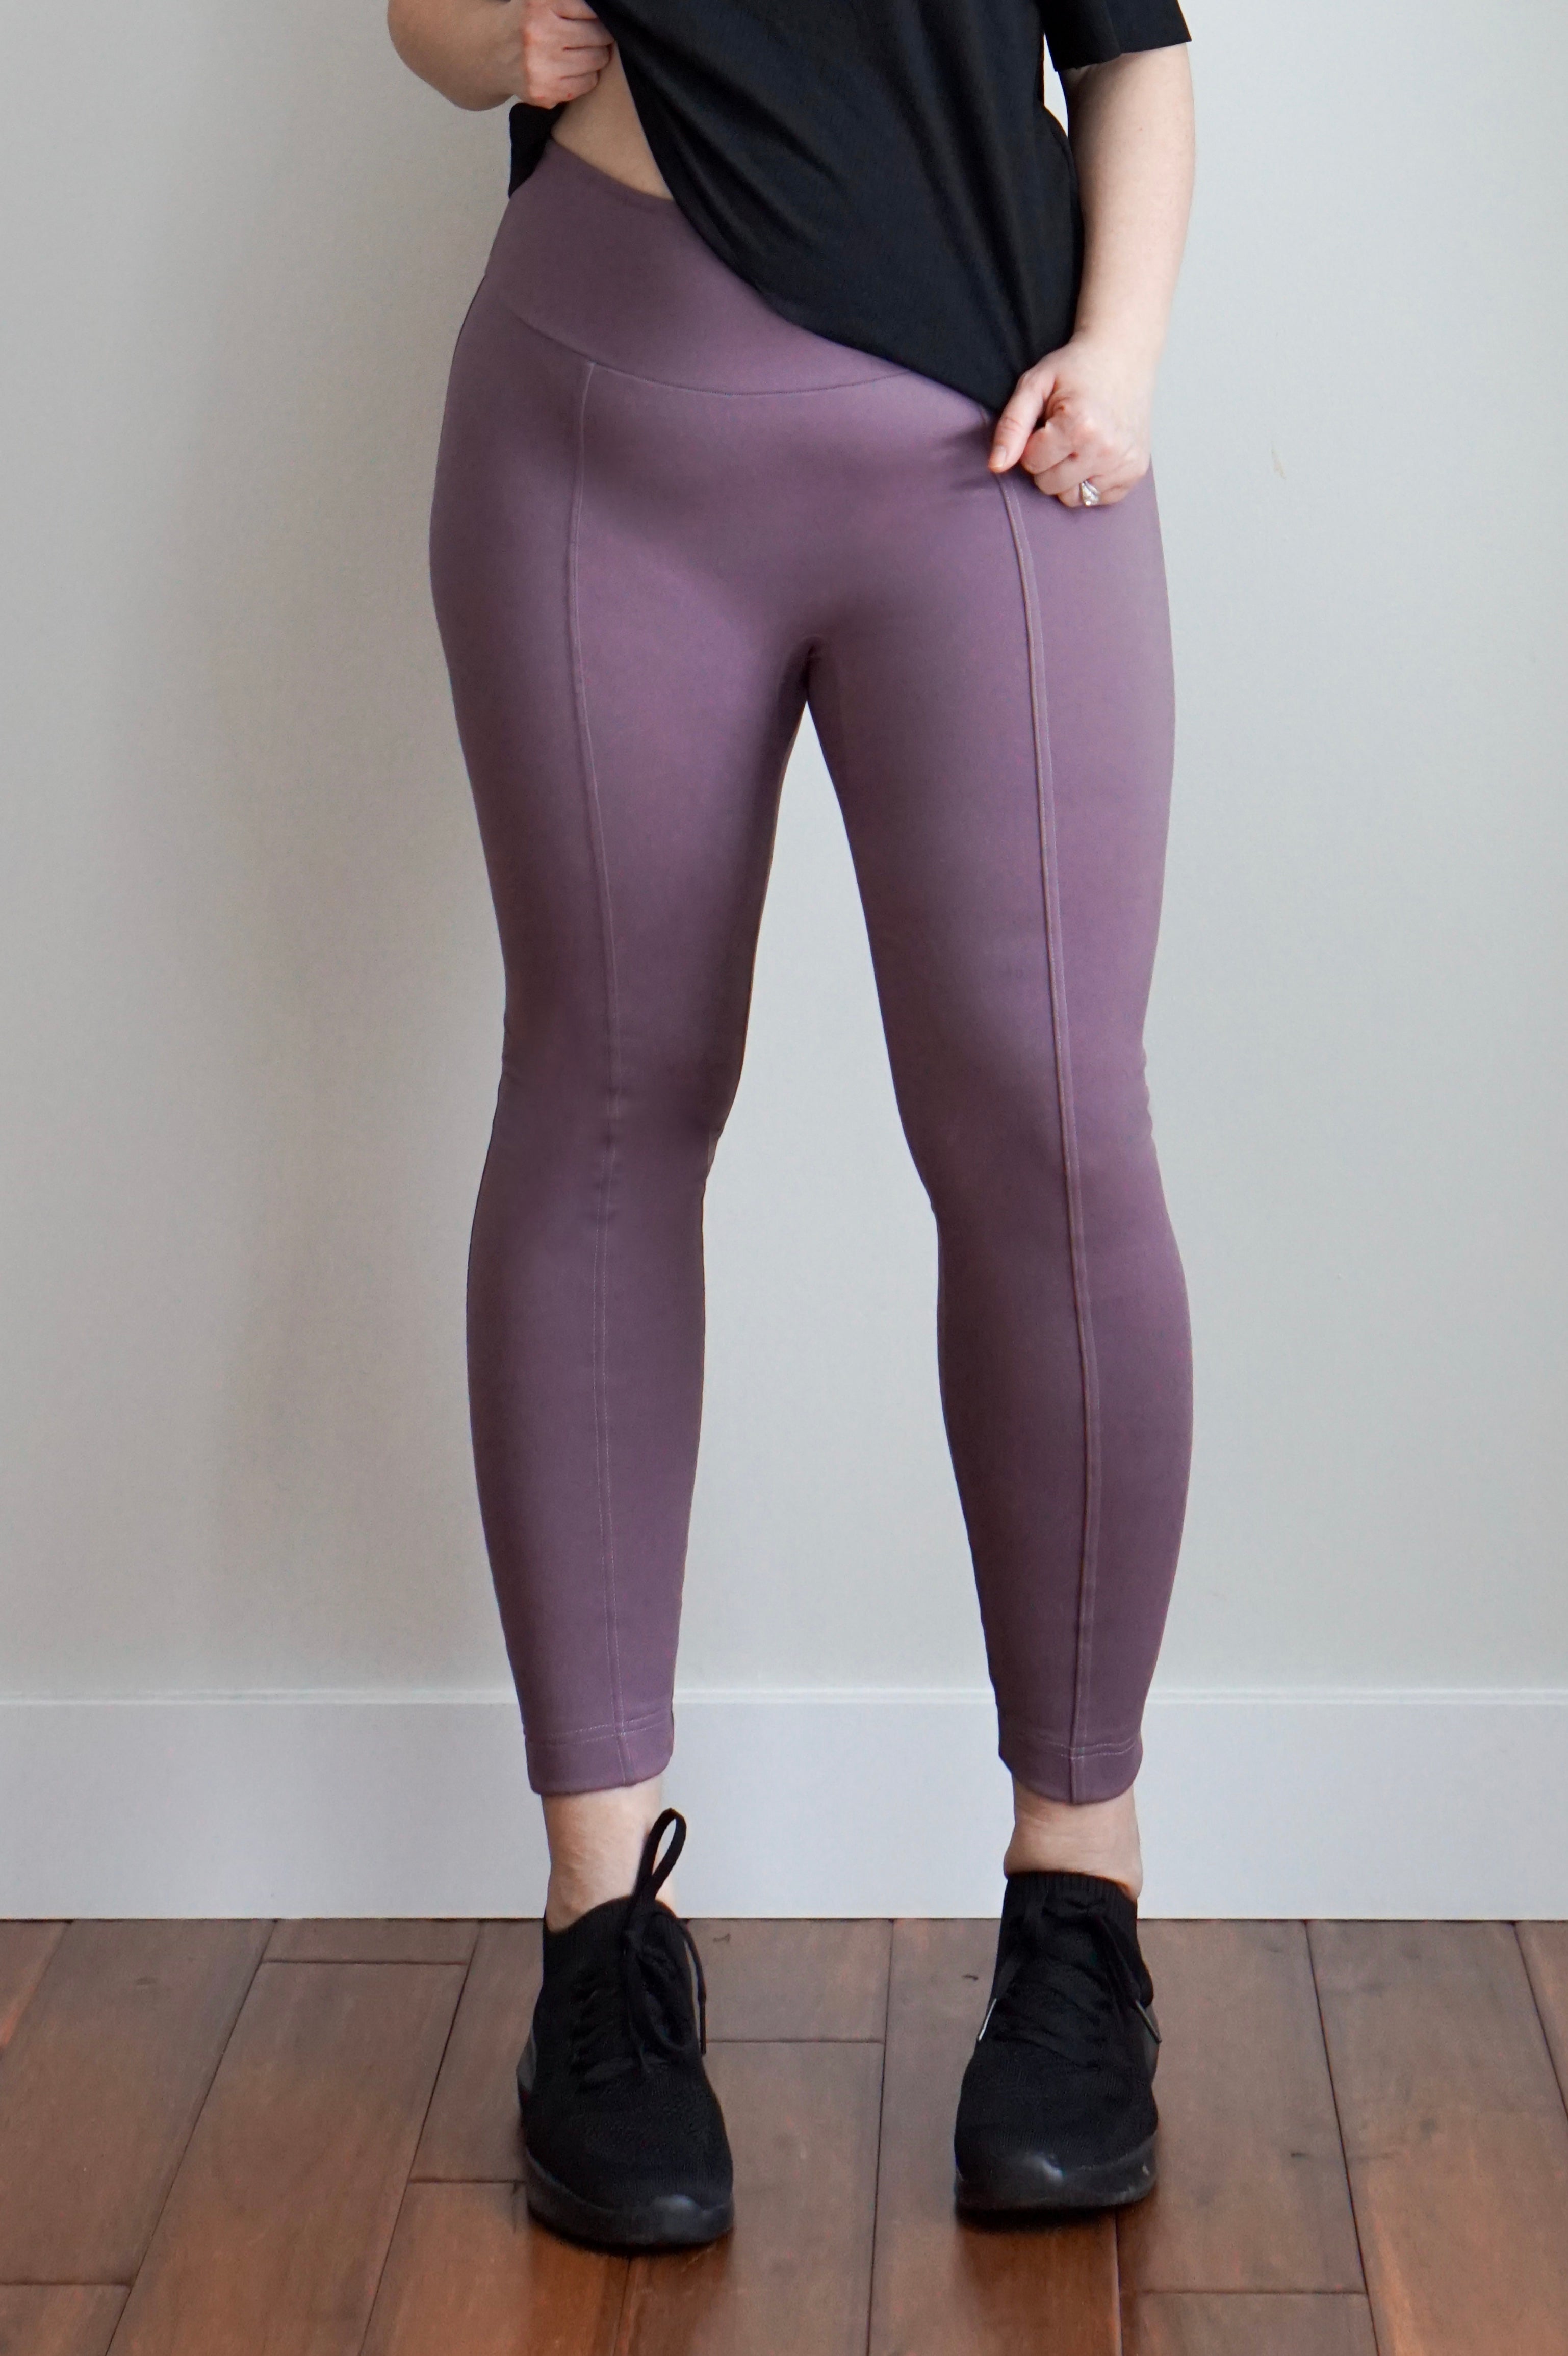 leggings with gusset, leggings with gusset Suppliers and